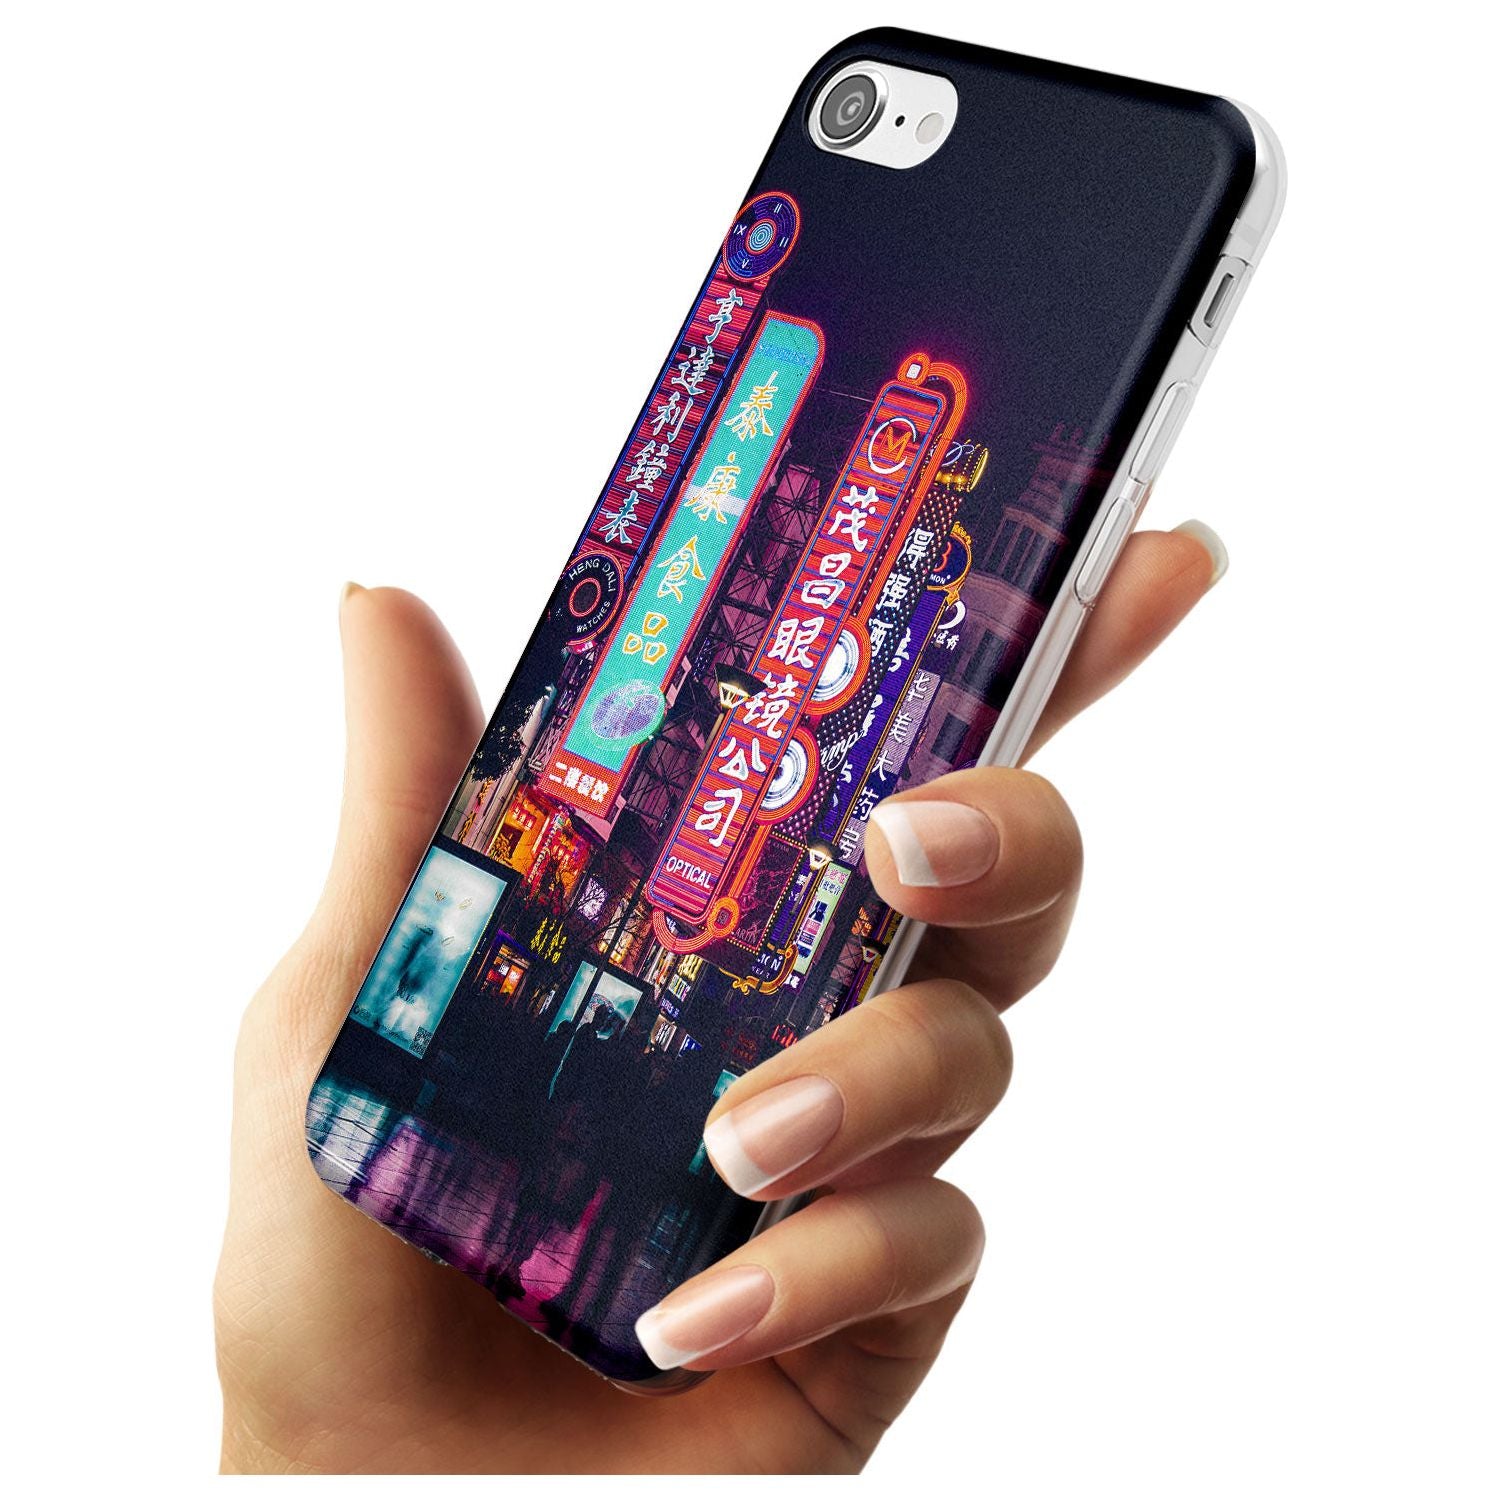 Busy Street - Neon Cities Photographs Slim TPU Phone Case for iPhone SE 8 7 Plus